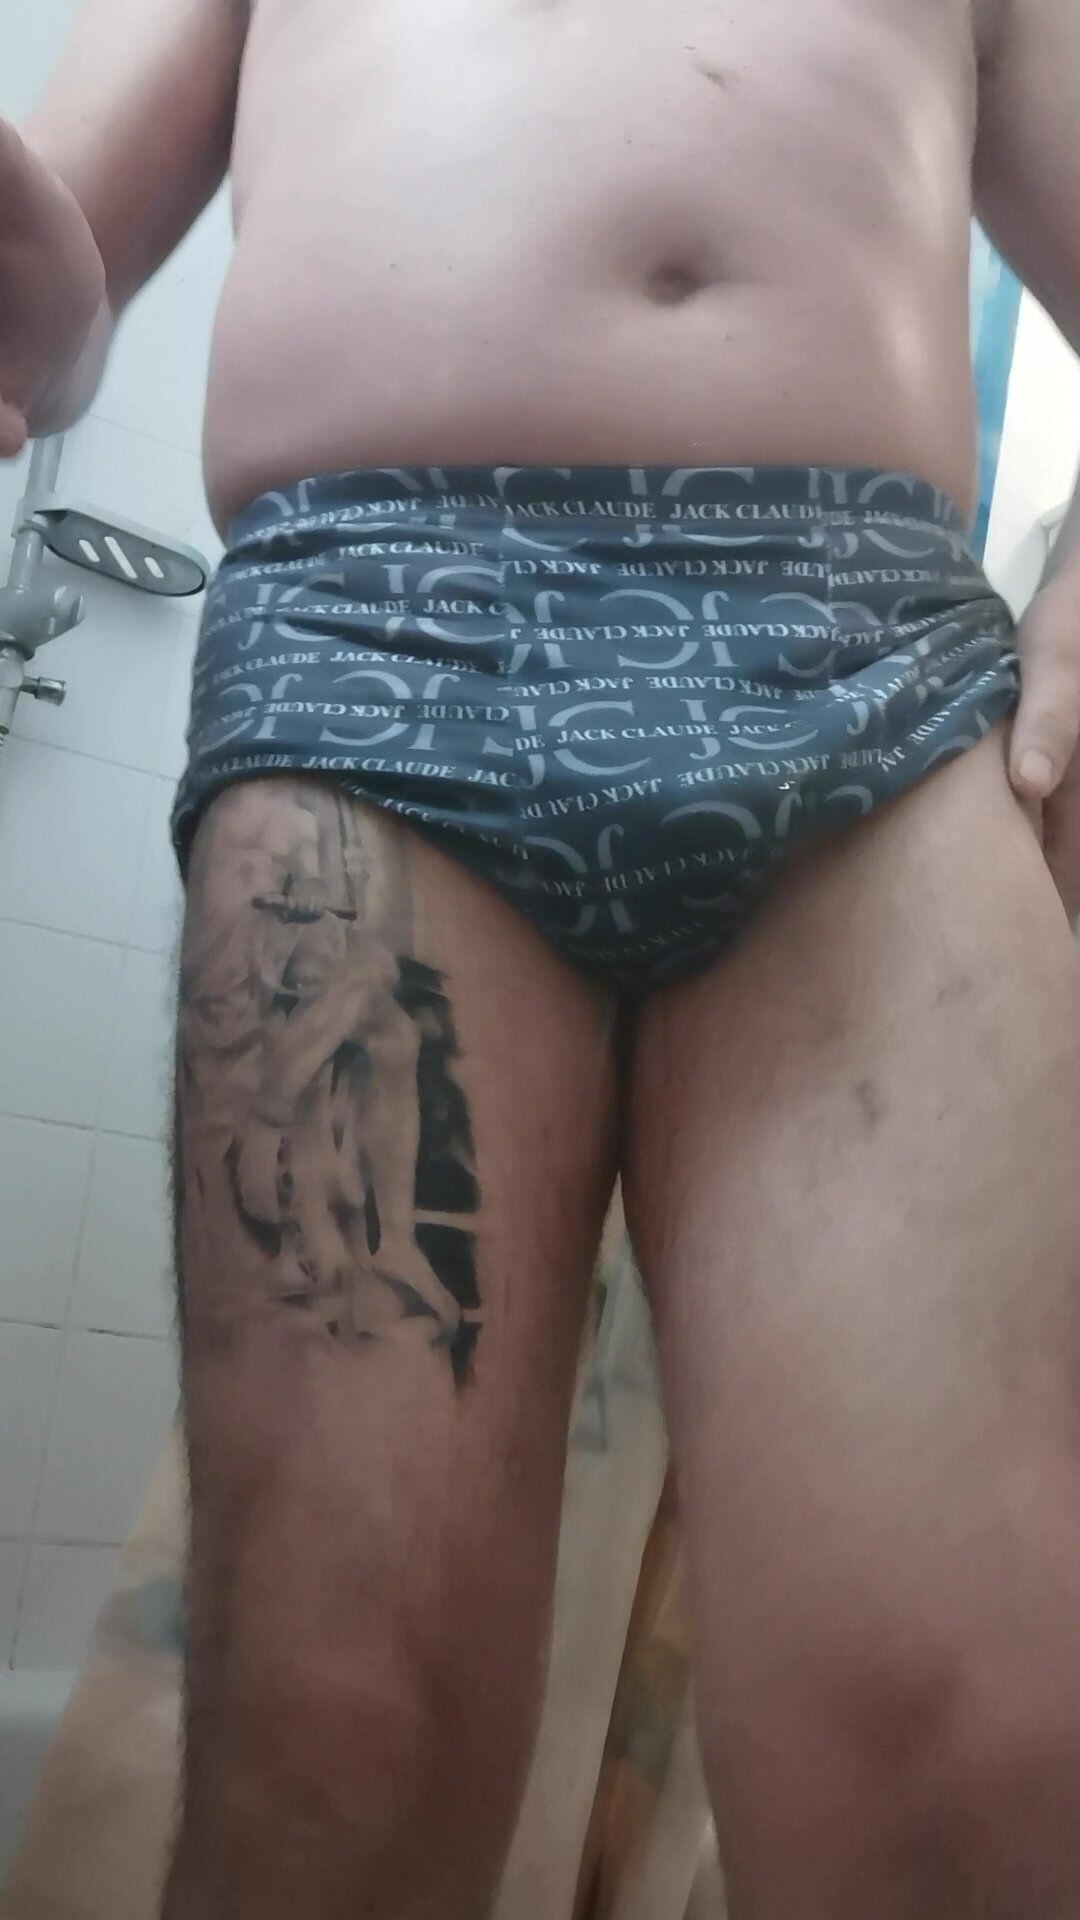 shitting and pissing in undies, 24th may